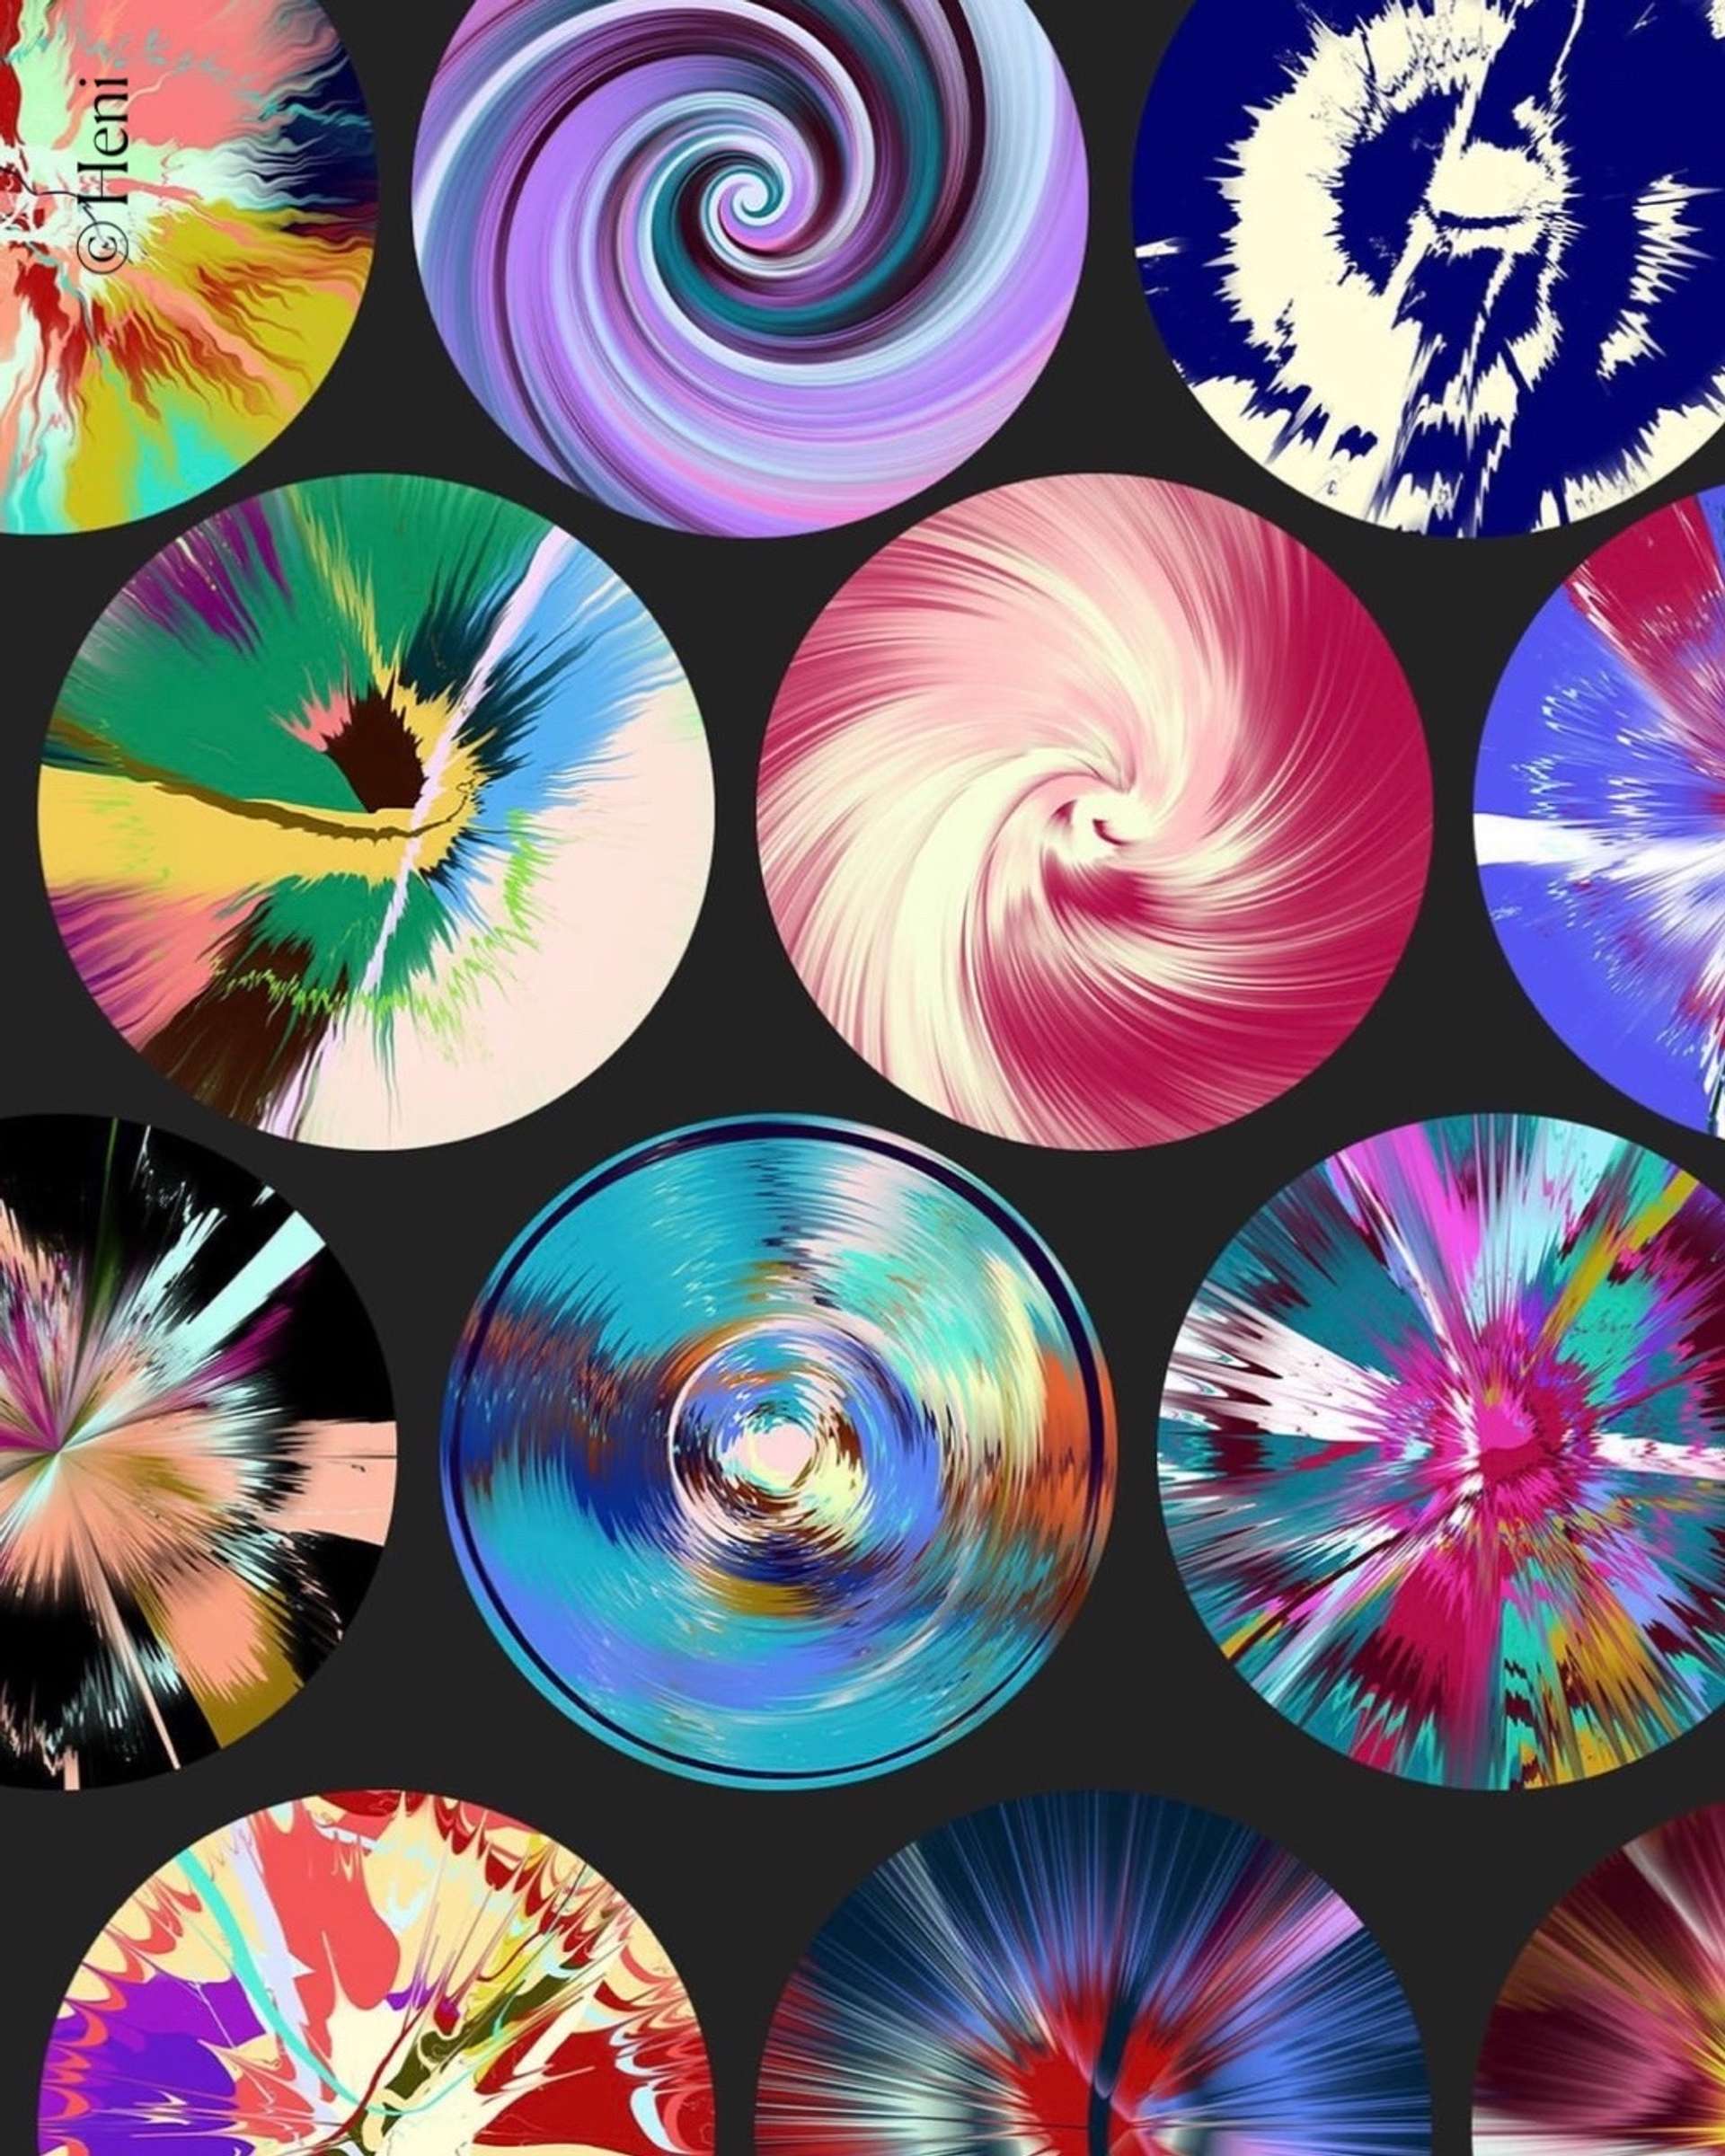 An image with a black background depicting numerous iterations of Damien Hirst's Beautiful Paintings, circular works with different colourful patterns.